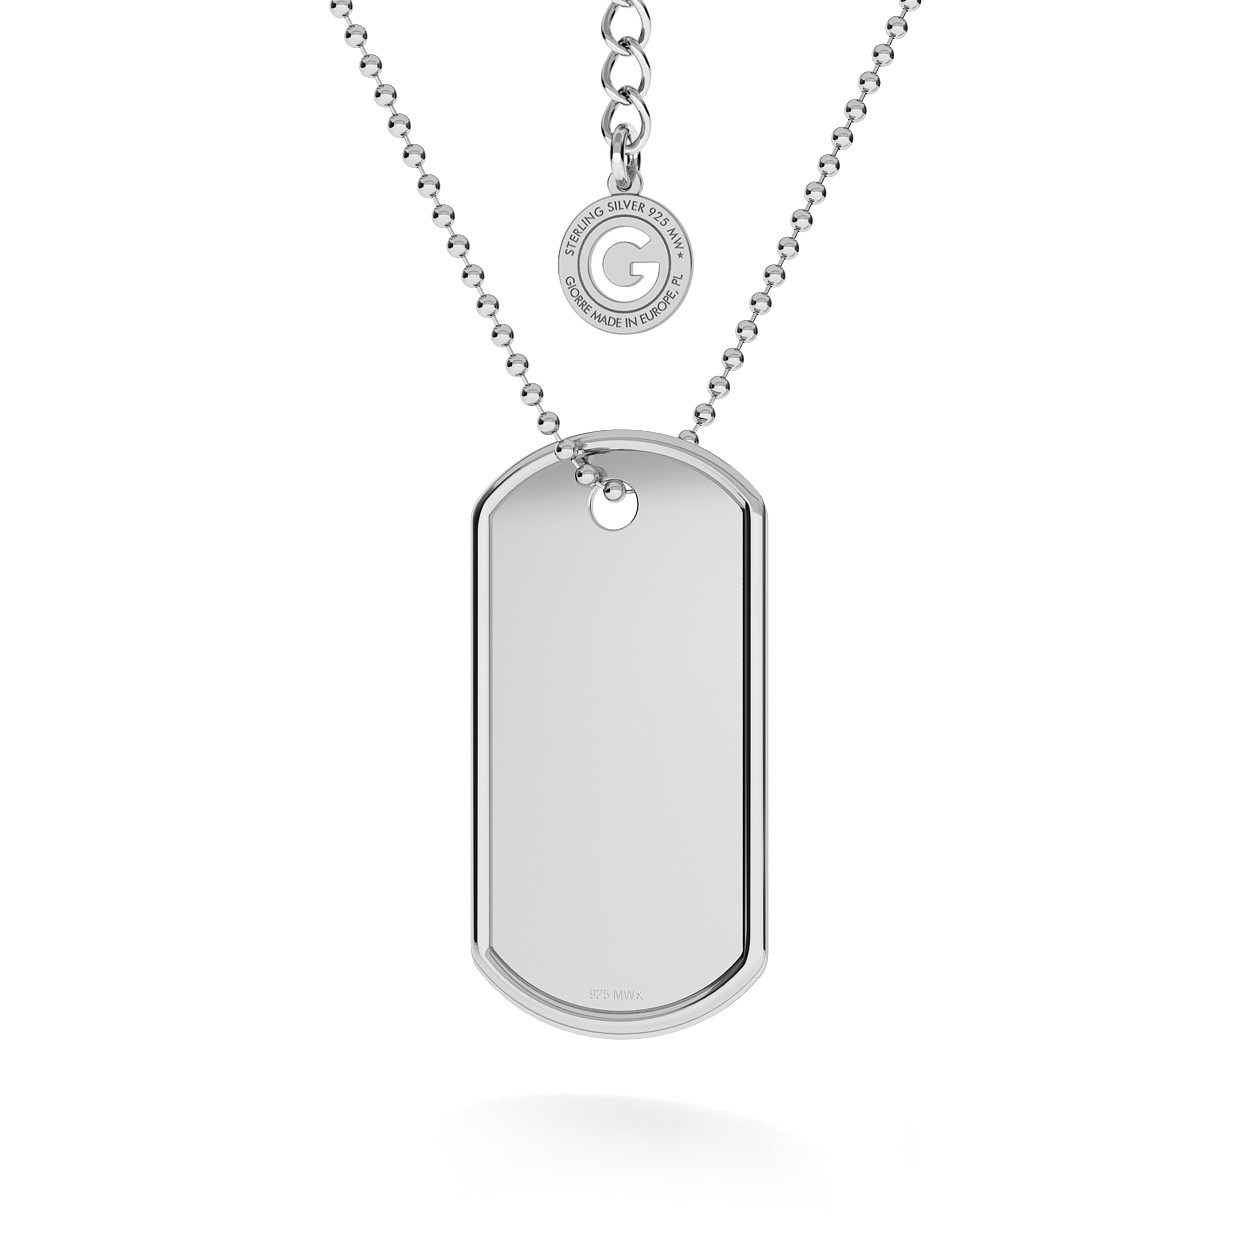 Giorre Woman's Necklace 34857